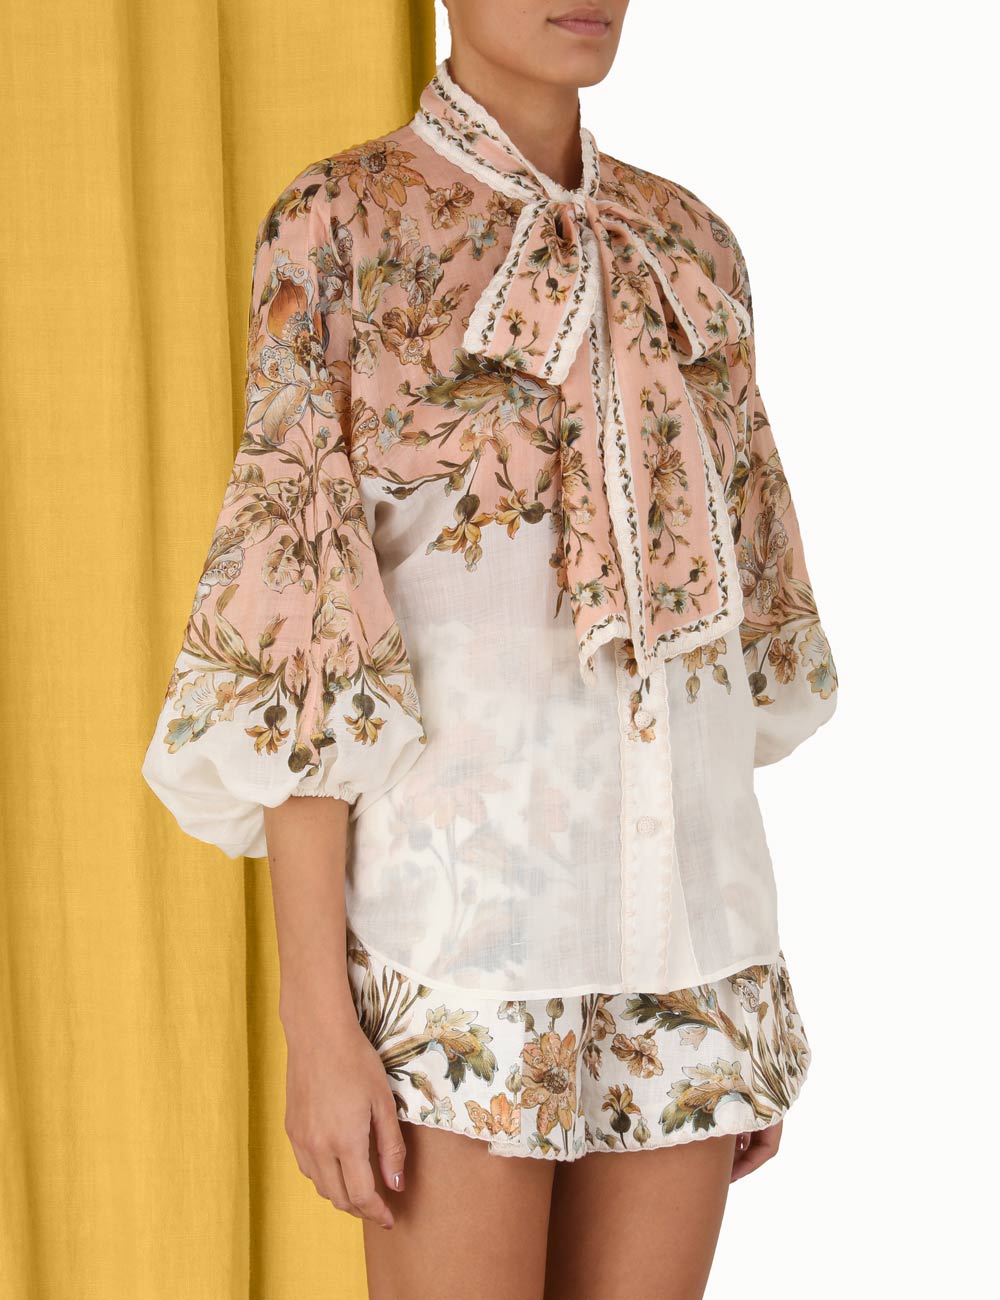 CHINTZ TIE NECK BLOUSE - Pink Daisy Floral